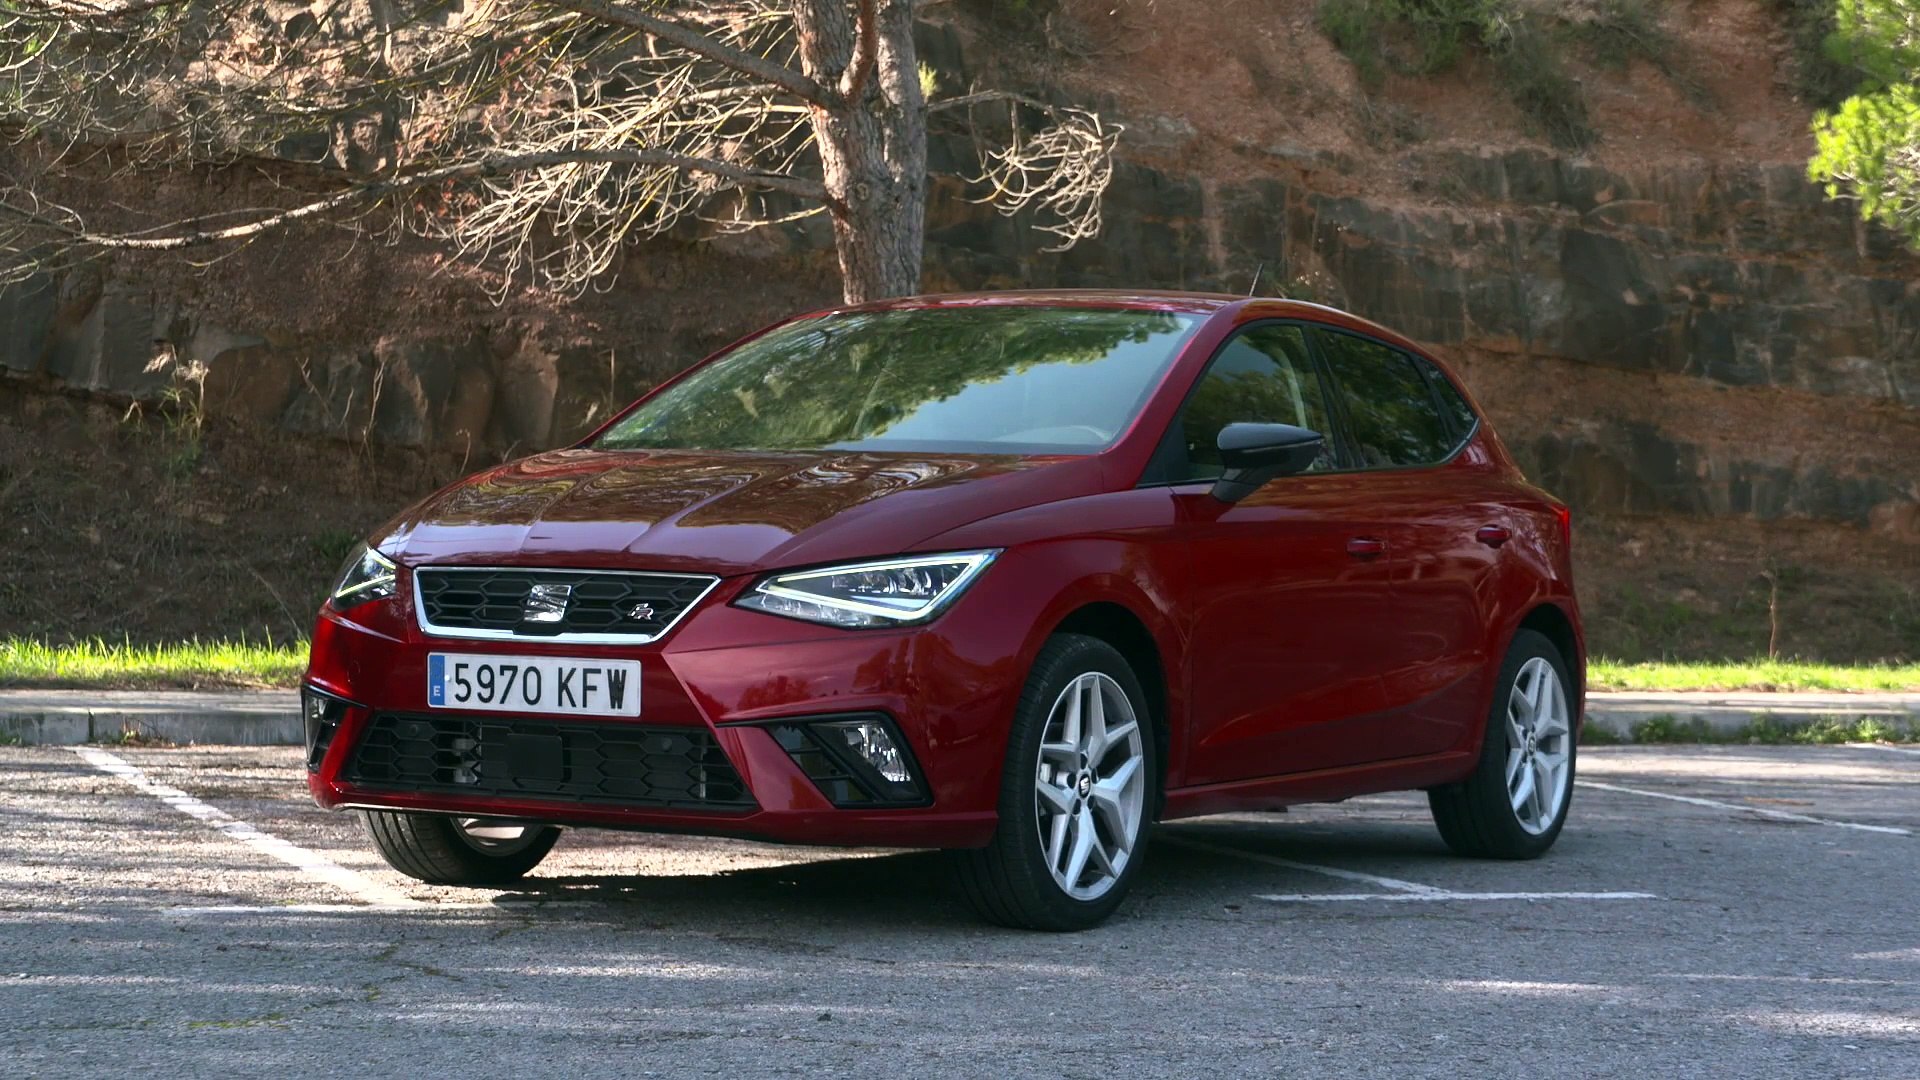 The new SEAT Ibiza FR TGI Design in Desire Red - video Dailymotion